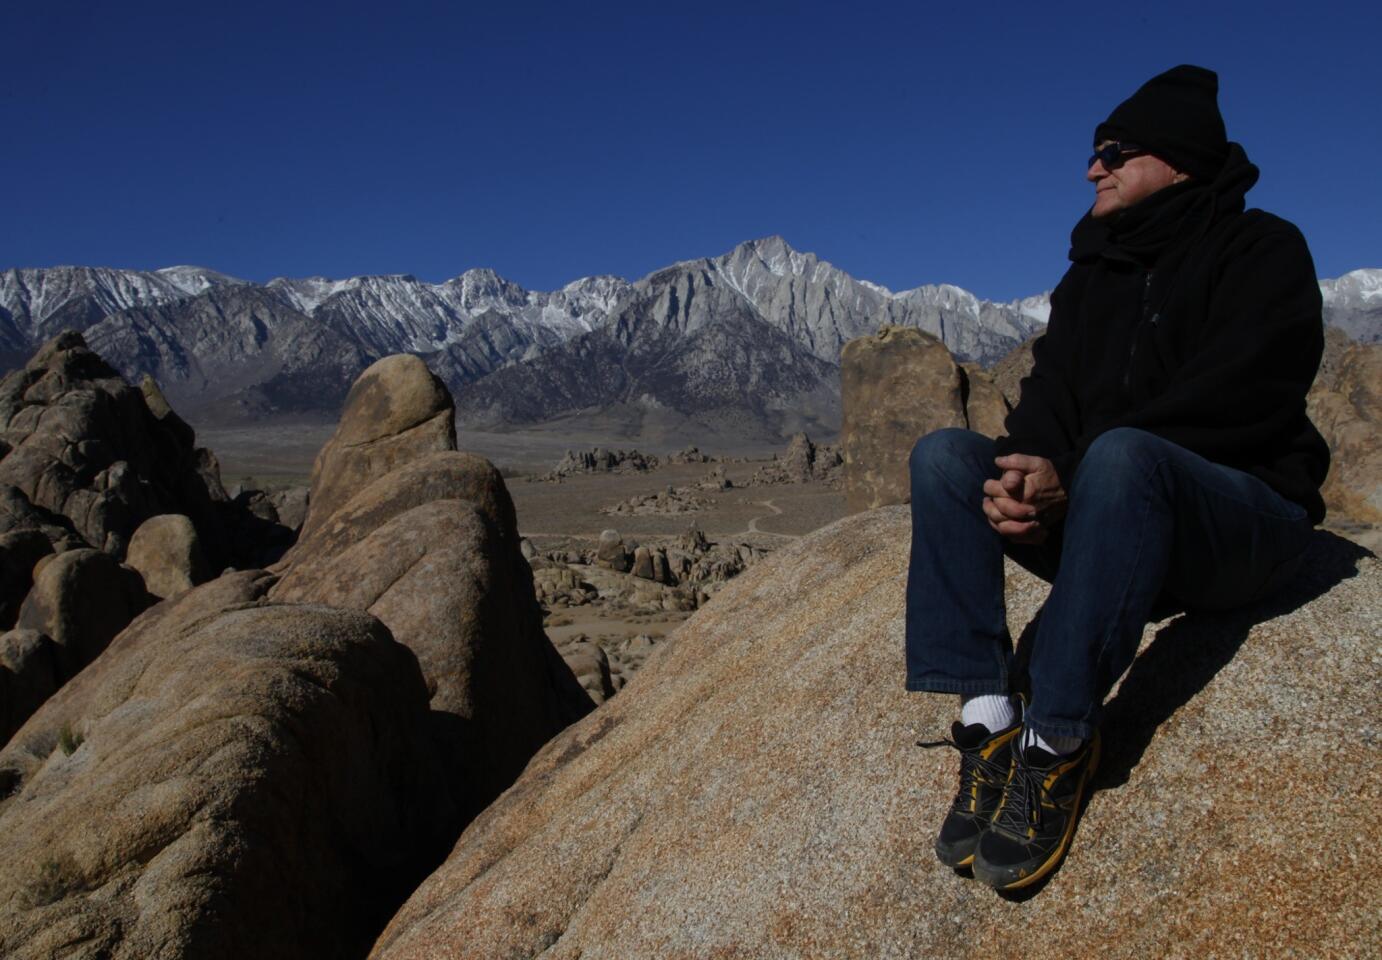 Chris Langley, executive director of the Lone Pine Film History Museum and the Inyo County film commissioner, sits among the rocks in the Alabama Hills in the Eastern Sierra Nevada near Lone Pine. The Alabama Hills have been a favorite backdrop for hundreds of movies, television shows and commercials.